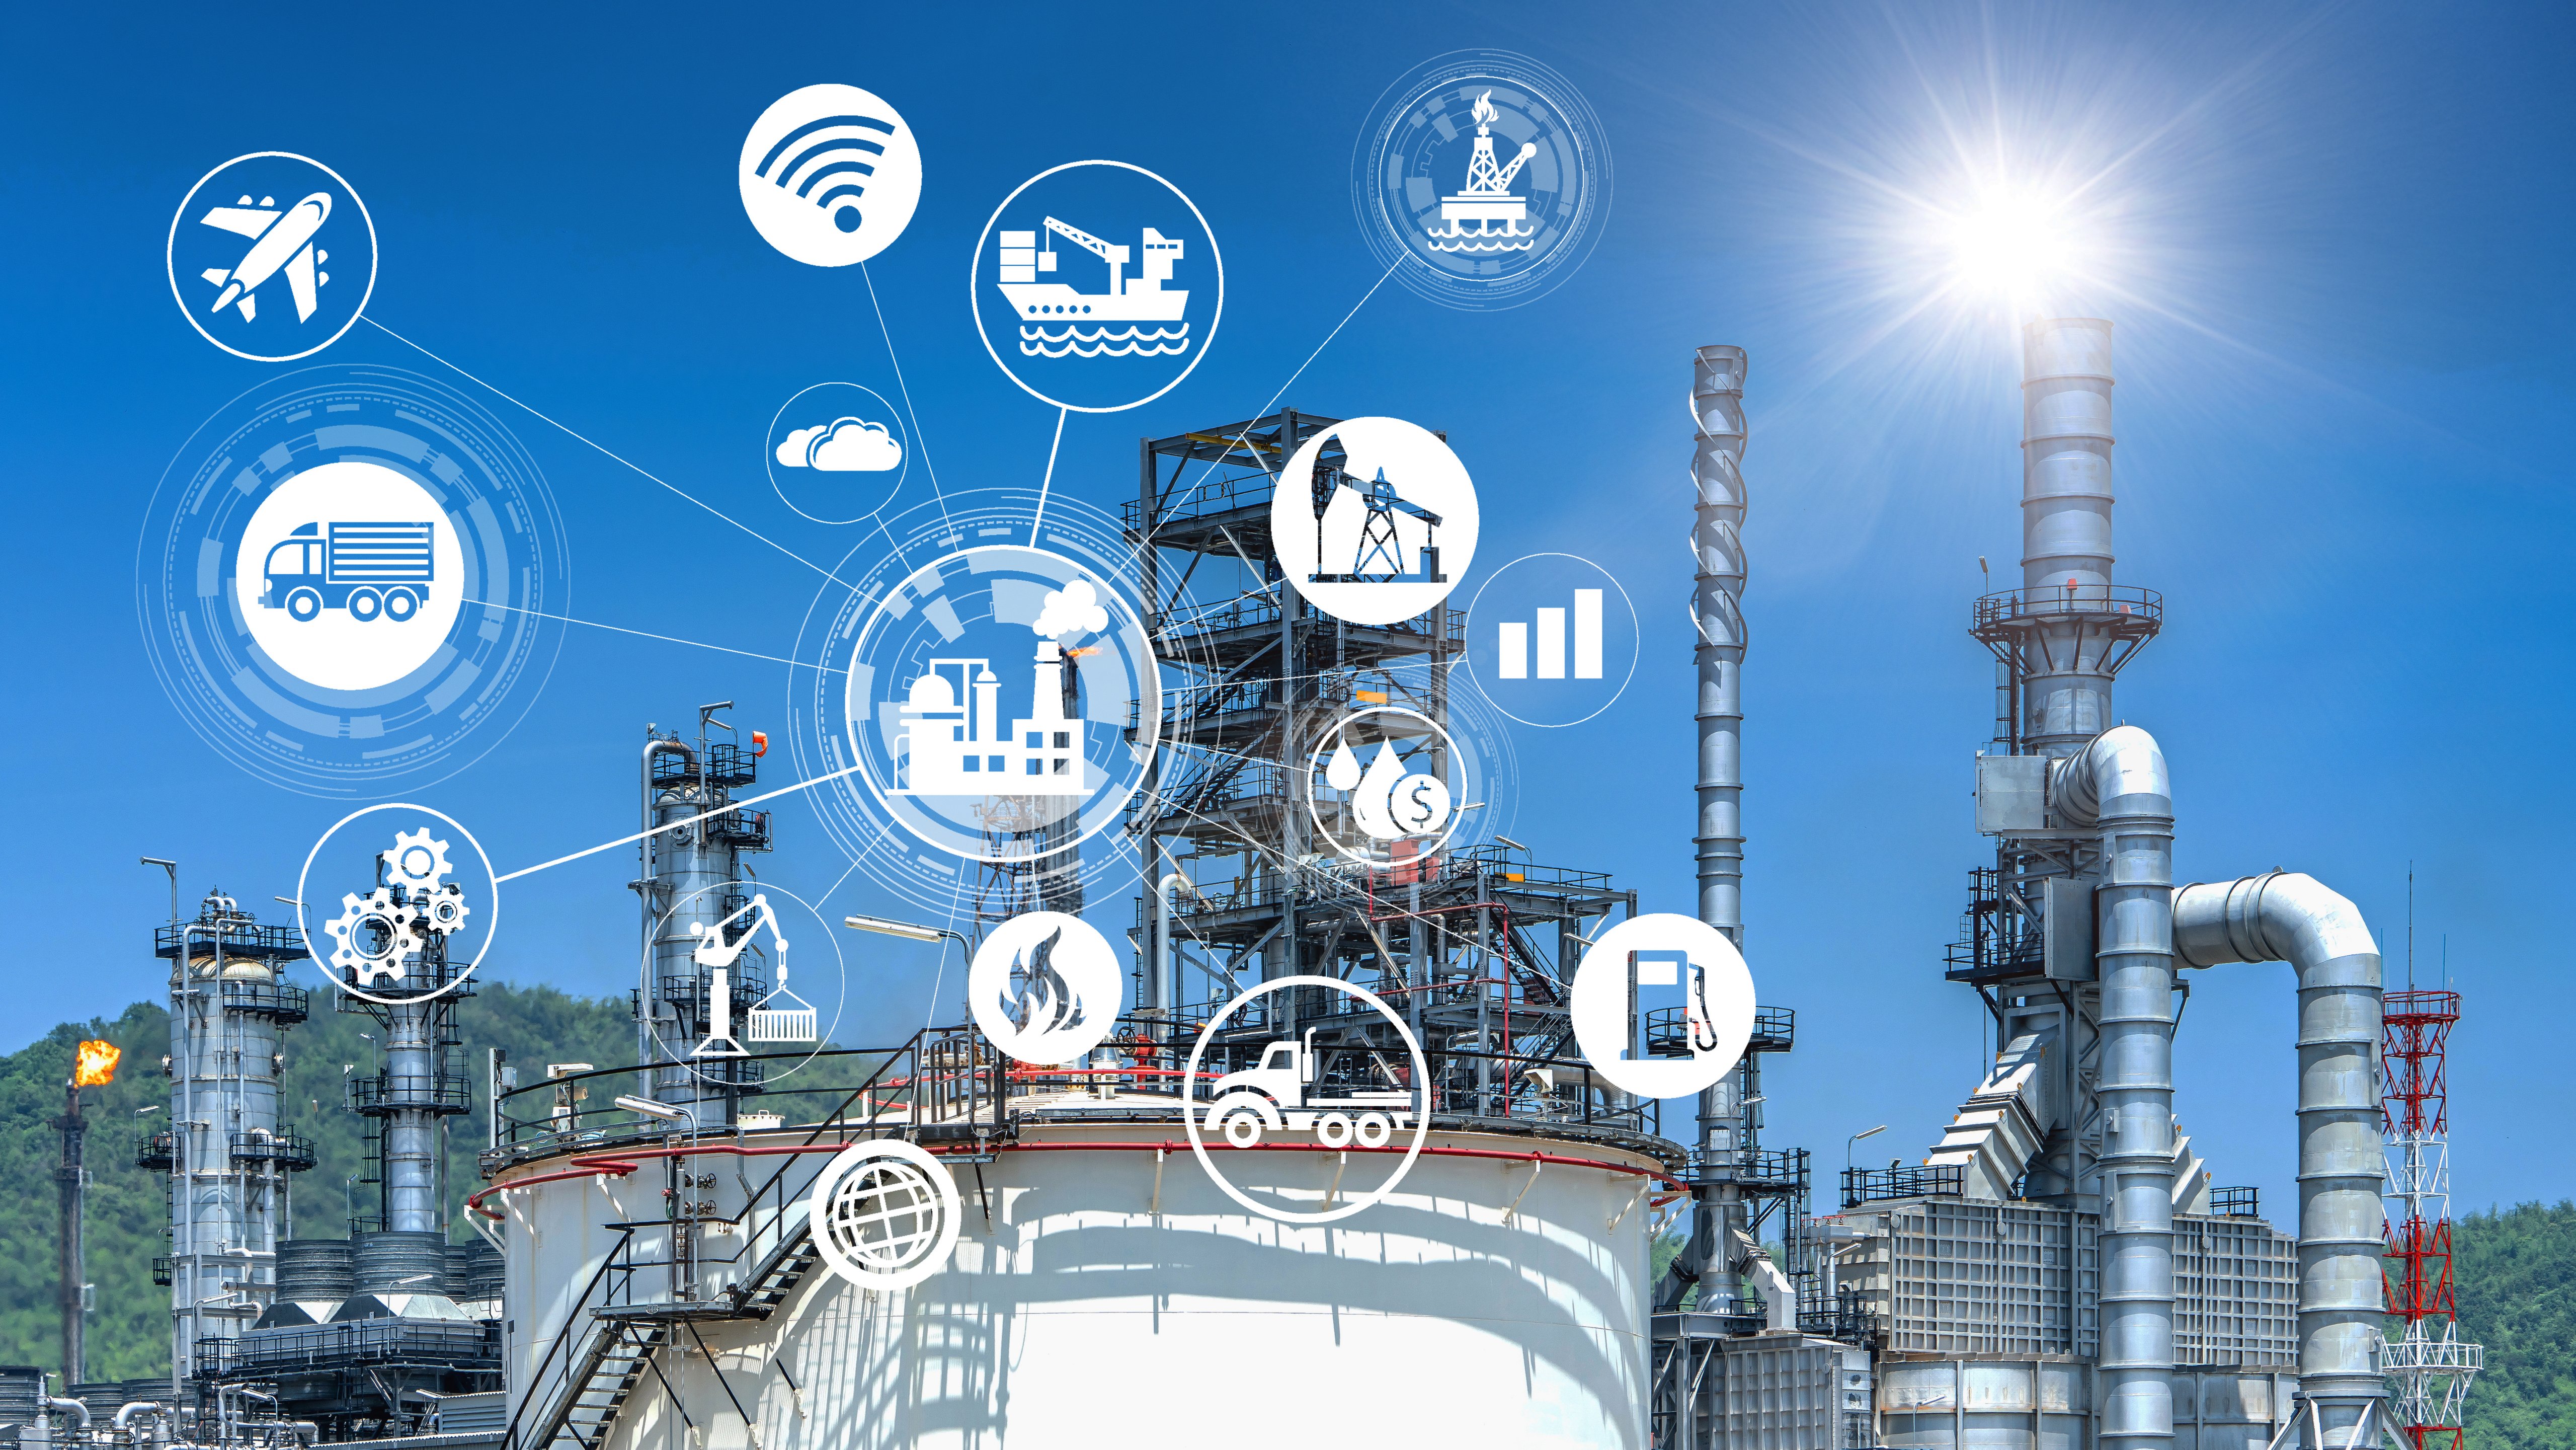 Oil refinery industry and icon connecting networking for information and using modern  technology, 